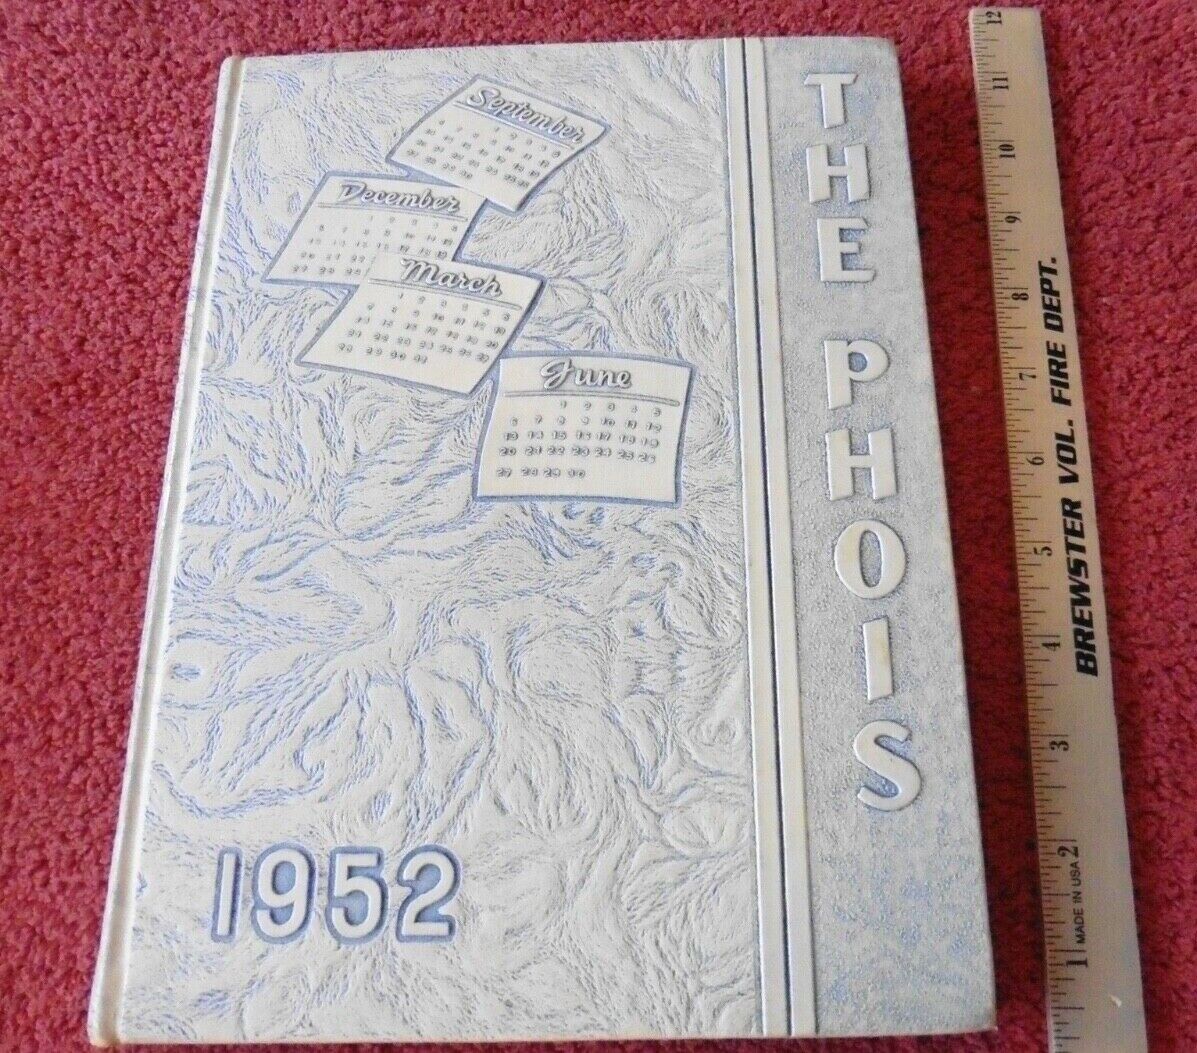 The PHOIS Class of 1952 yearbook Poughkeepsie High School New York